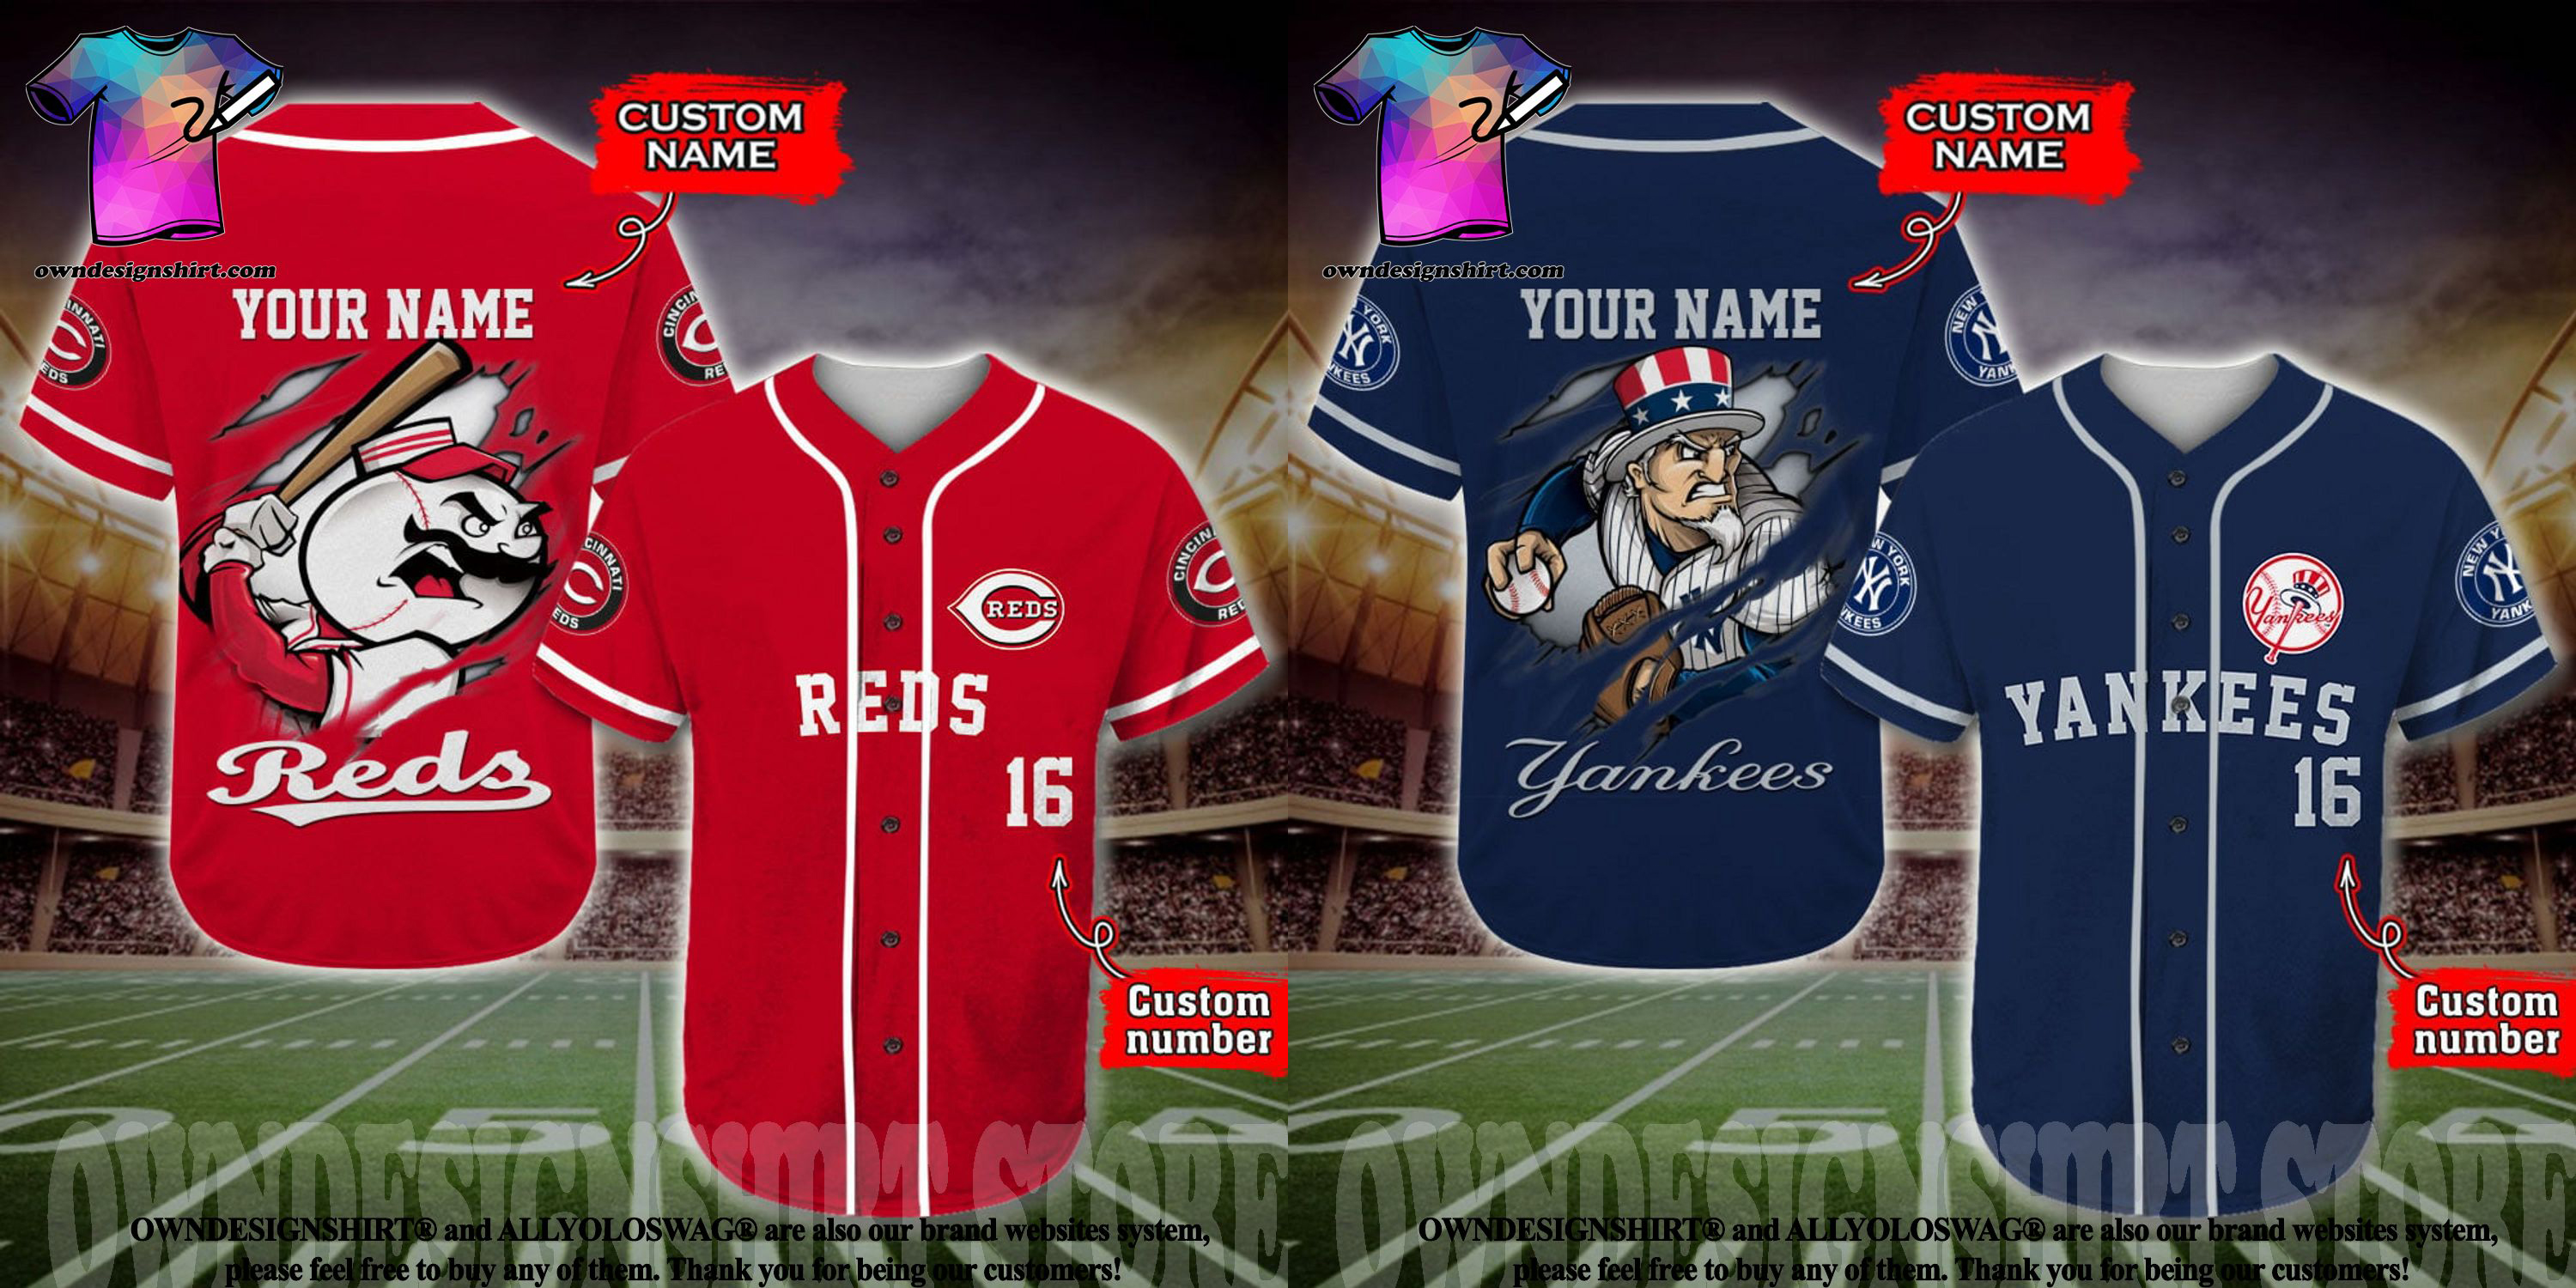 NY Yankees vs Cincinnati Reds - What do you think of these 2 teams?